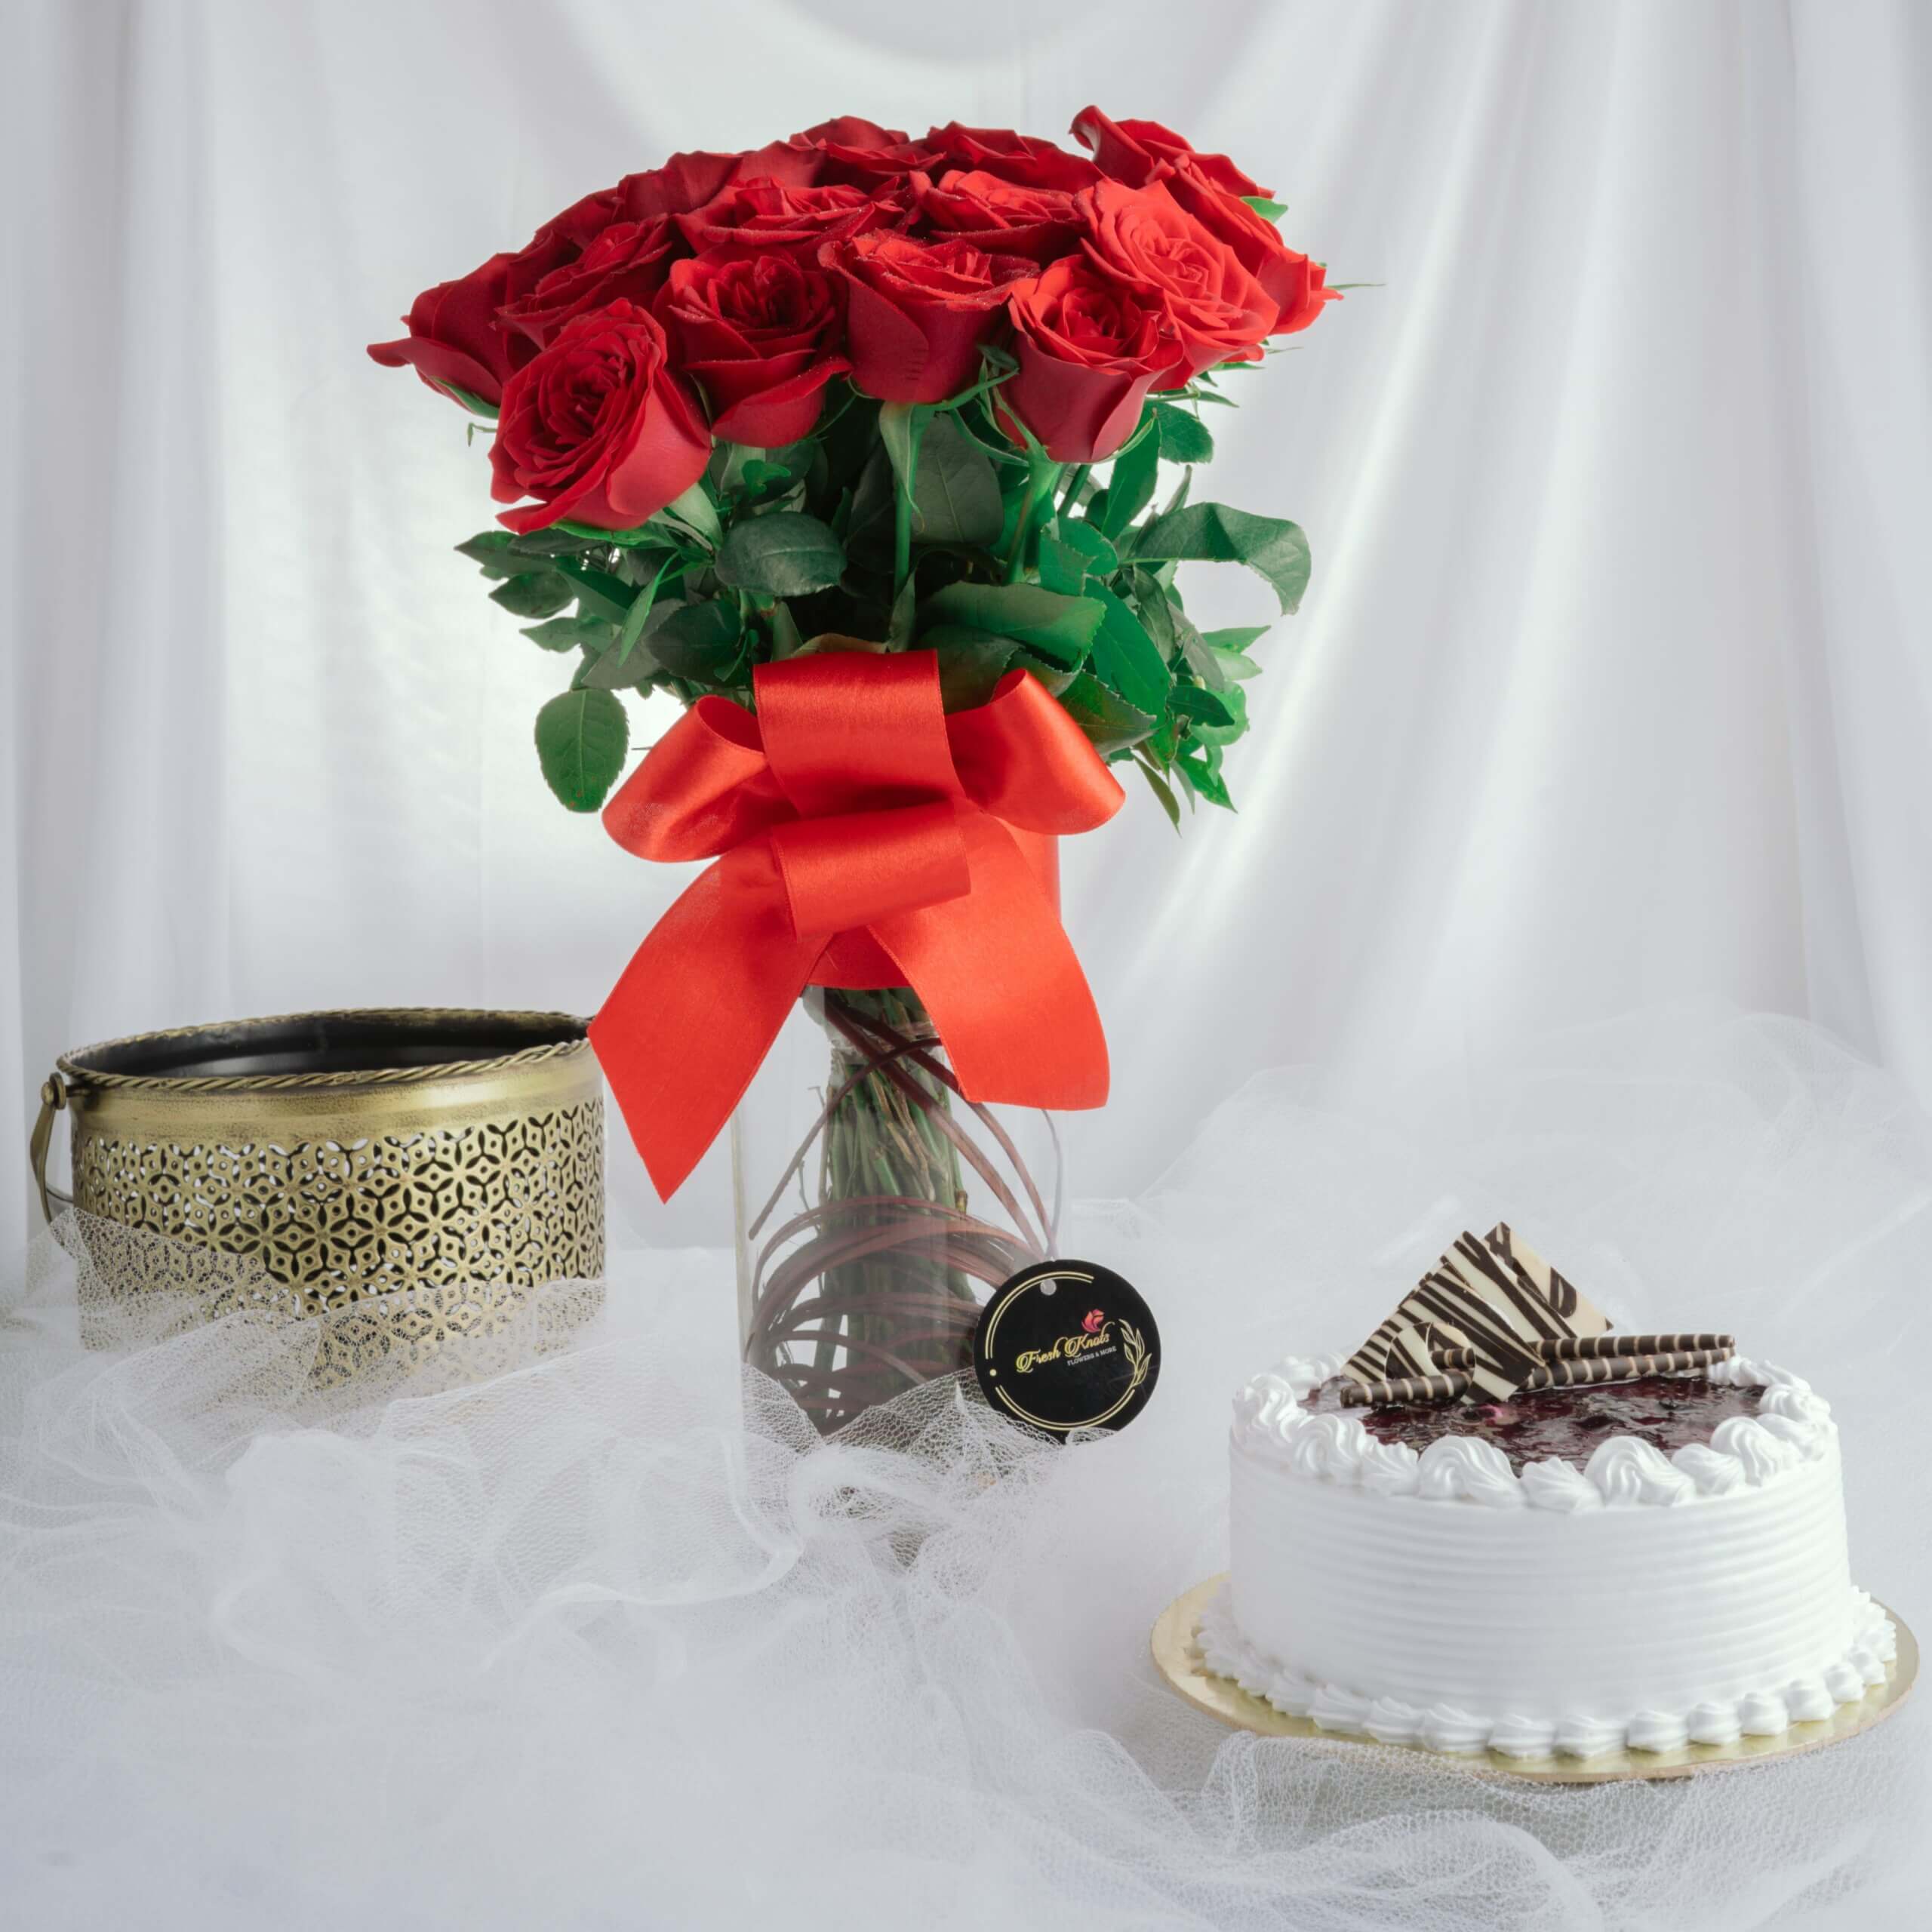 Send Rose Cake Combo to Guwahati online with Petalscart